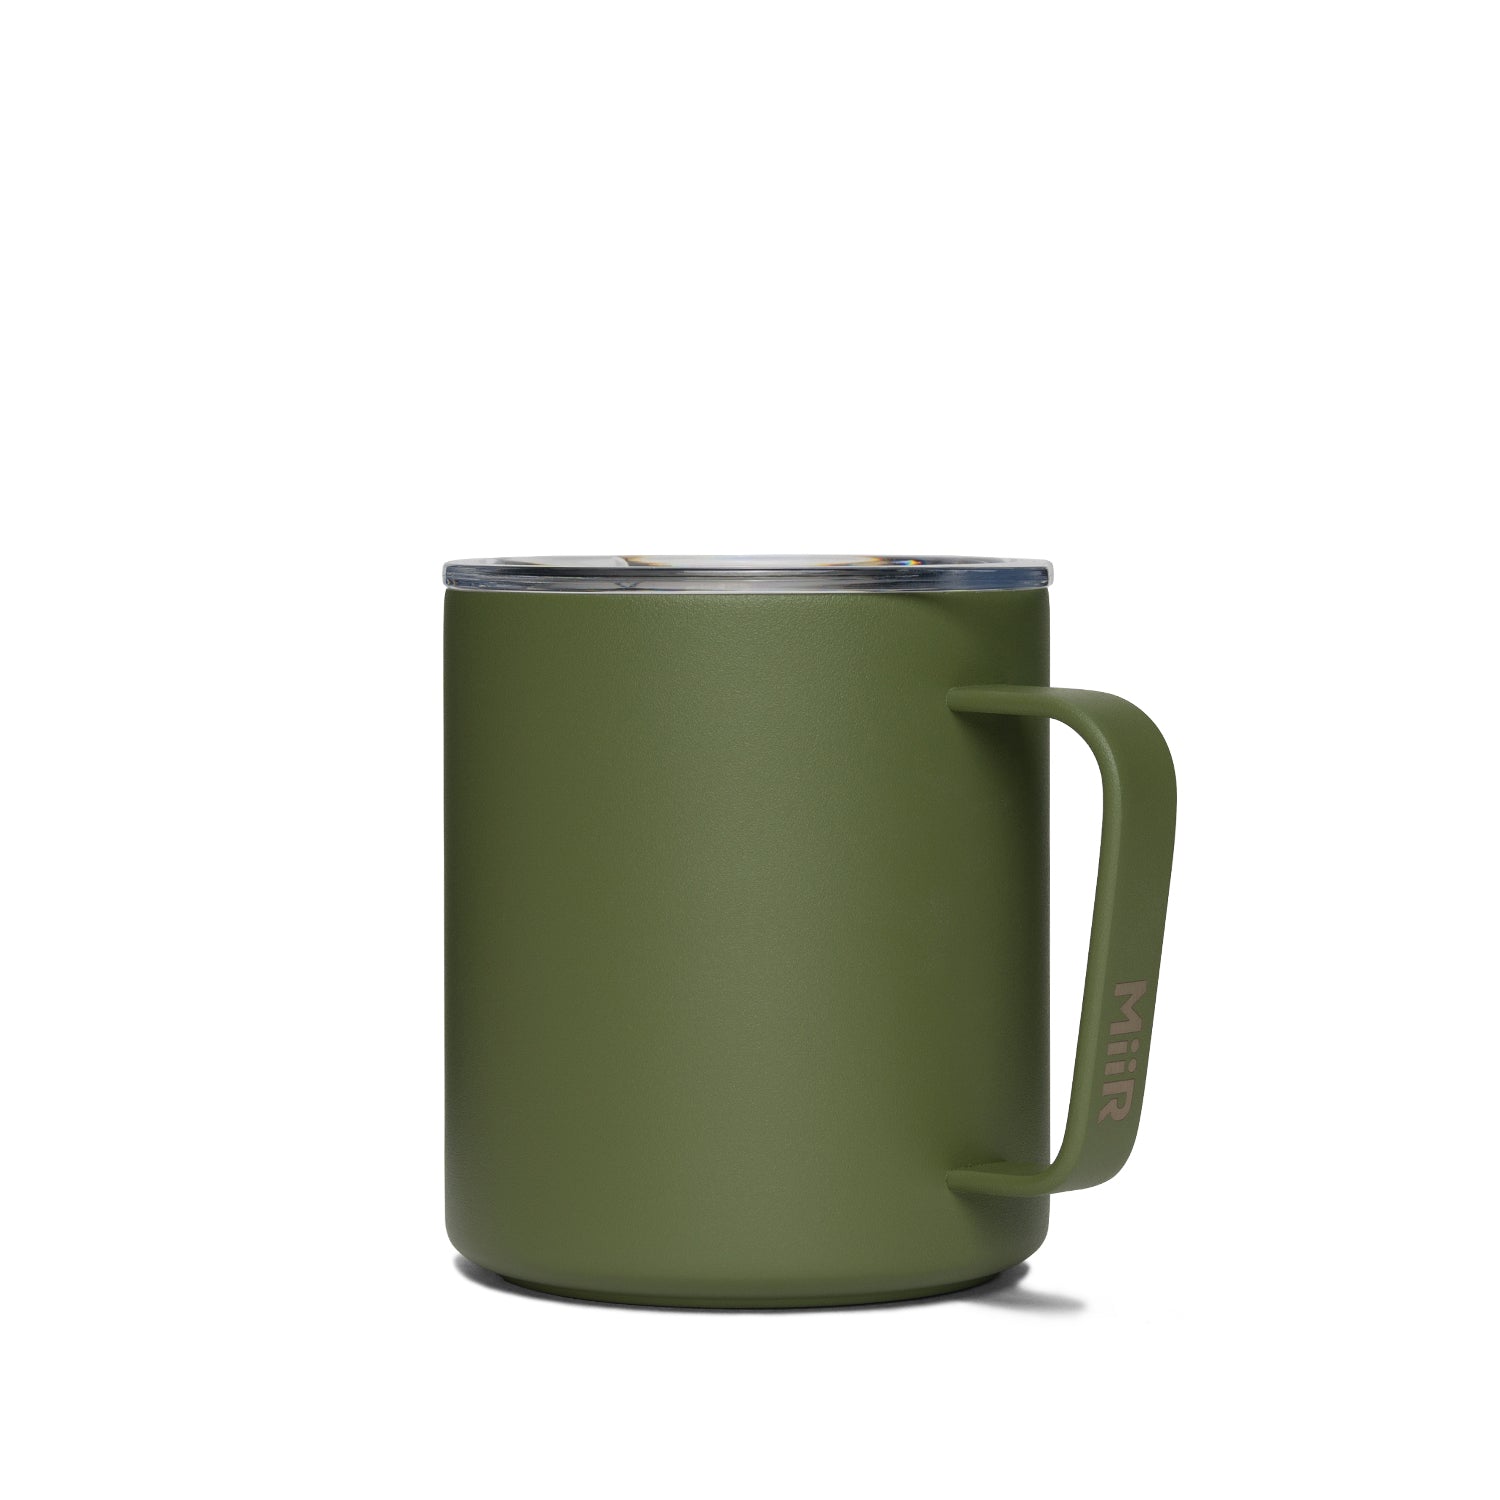 Slow Sipper Camp Cup from MiiR®